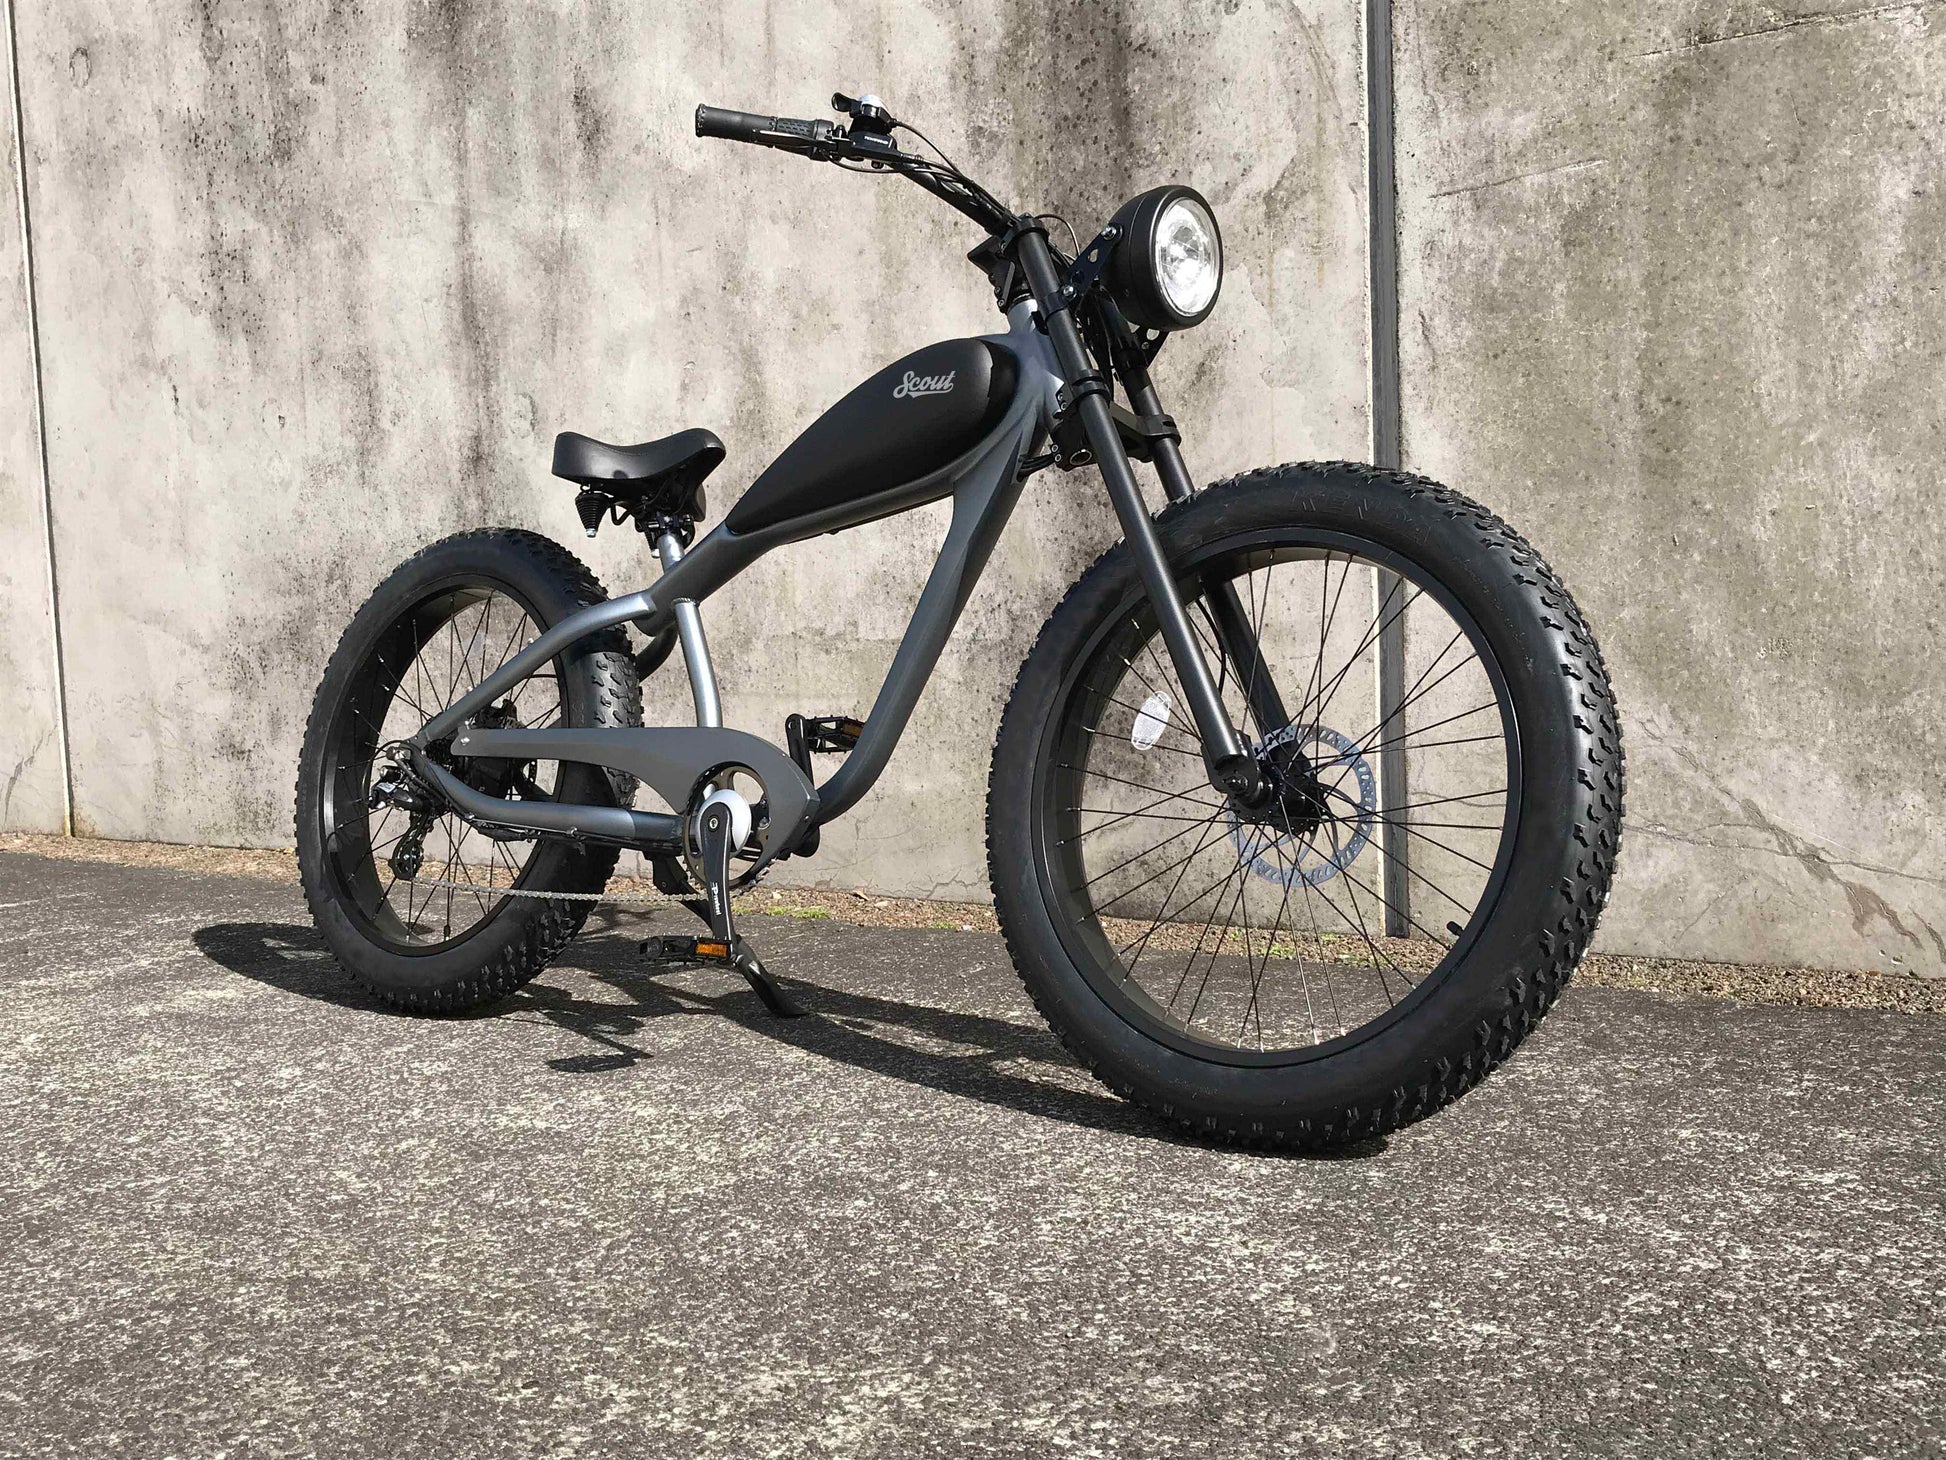 The Scout Electric Motorbike Cruiser Fat Bike with top quality components from Shimano, Bafang, Tektro and Samsung. Manufactured for Boostbikes.